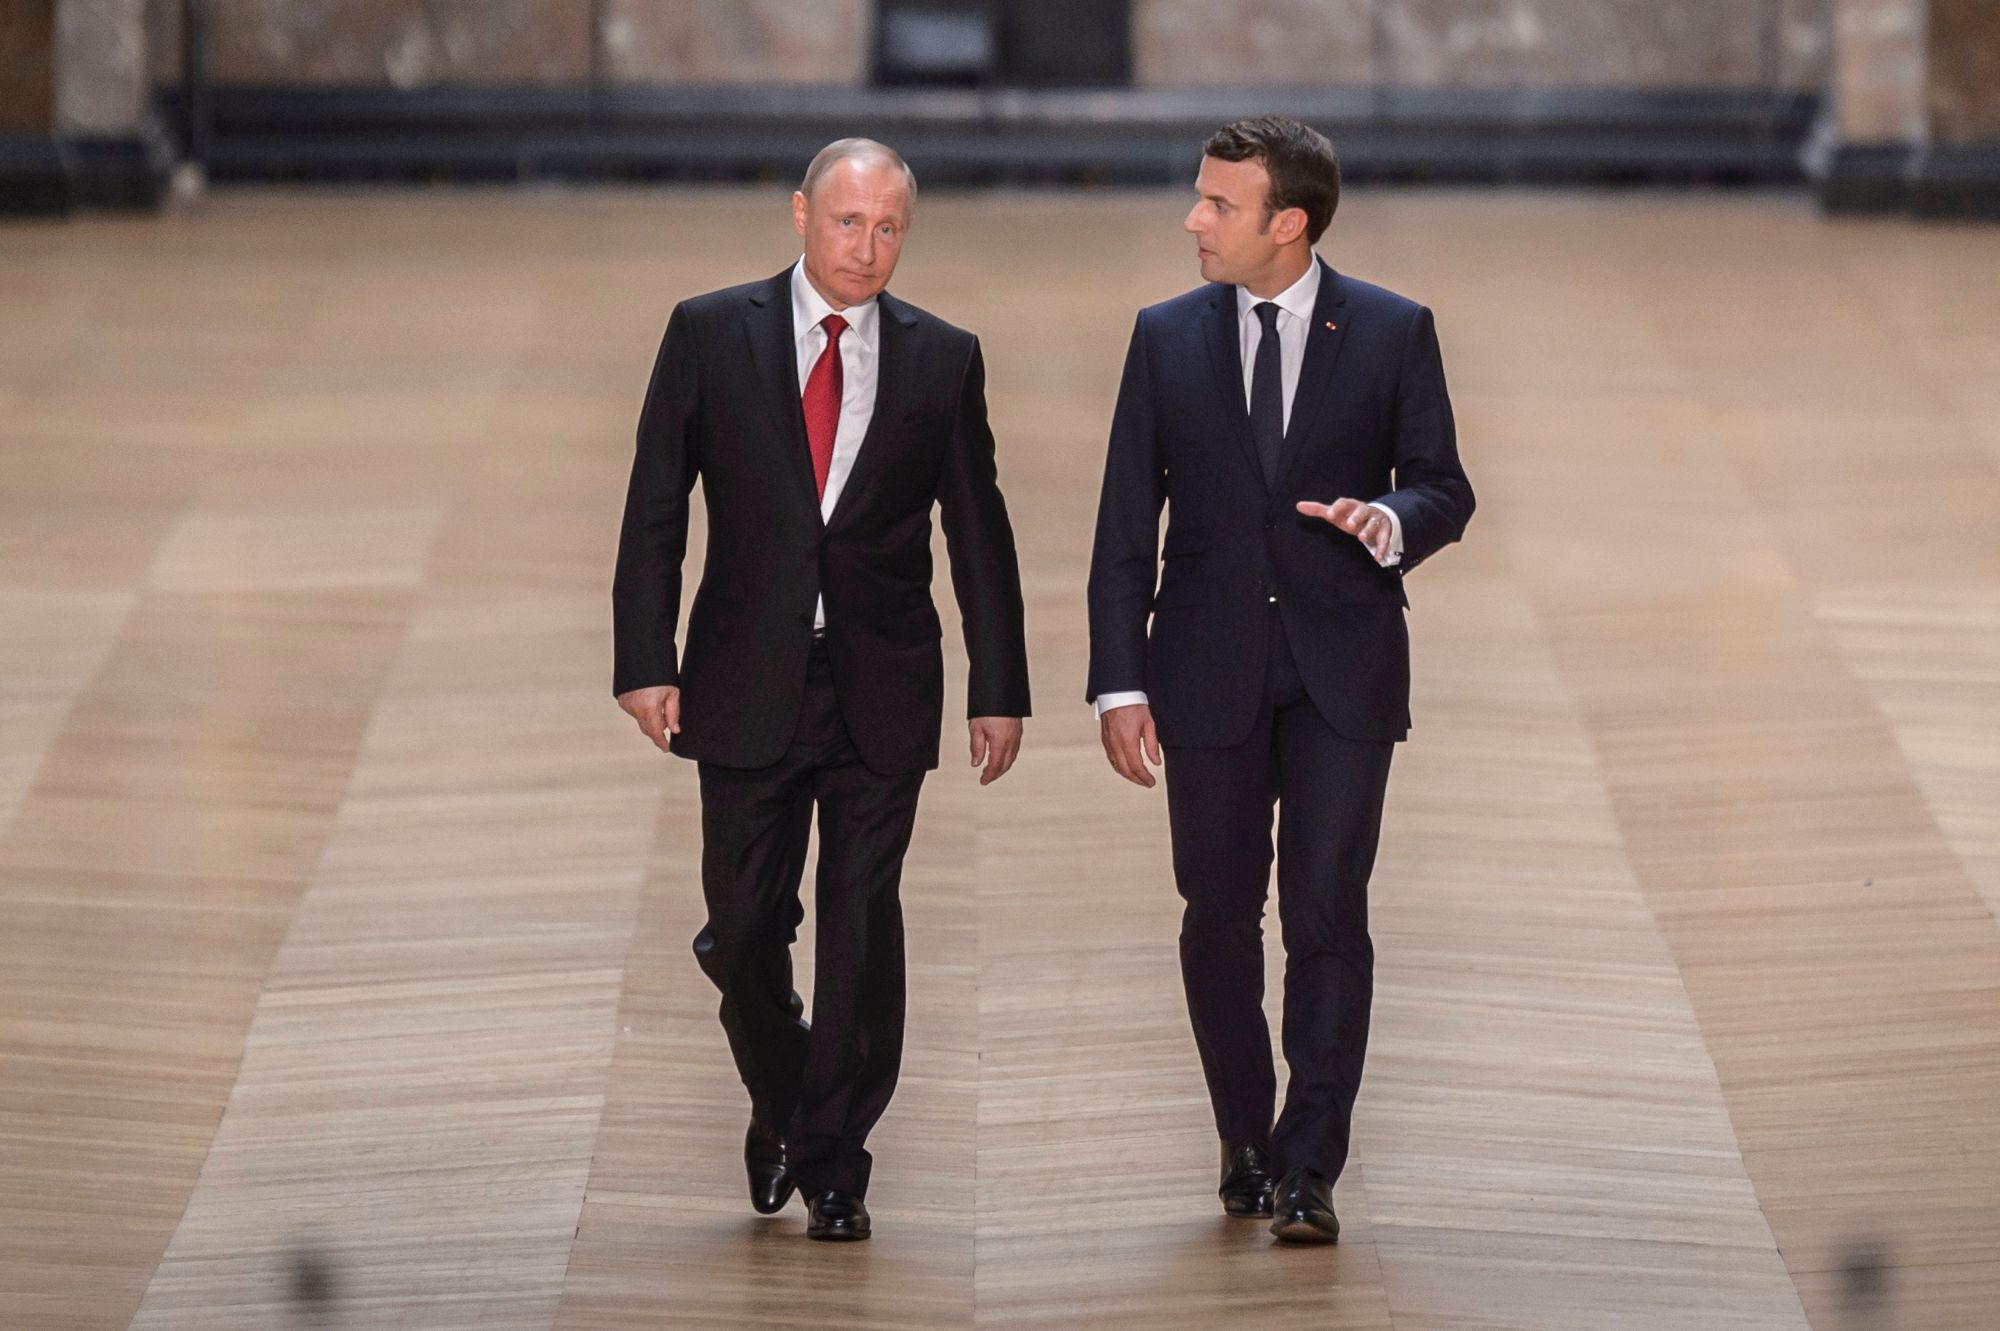 epa05997799 French President Emmanuel Macron (R) and Russian President Vladimir Putin (L) arrive for a joint news conference after a working meeting at the Versailles Palace, near Paris, France, 29 May 2017. Discussions between the two are expected to include the situation in Syria and Russia's veto position at the UN security council.  EPA/CHRISTOPHE PETIT TESSON FRANCE RUSSIA DIPLOMACY